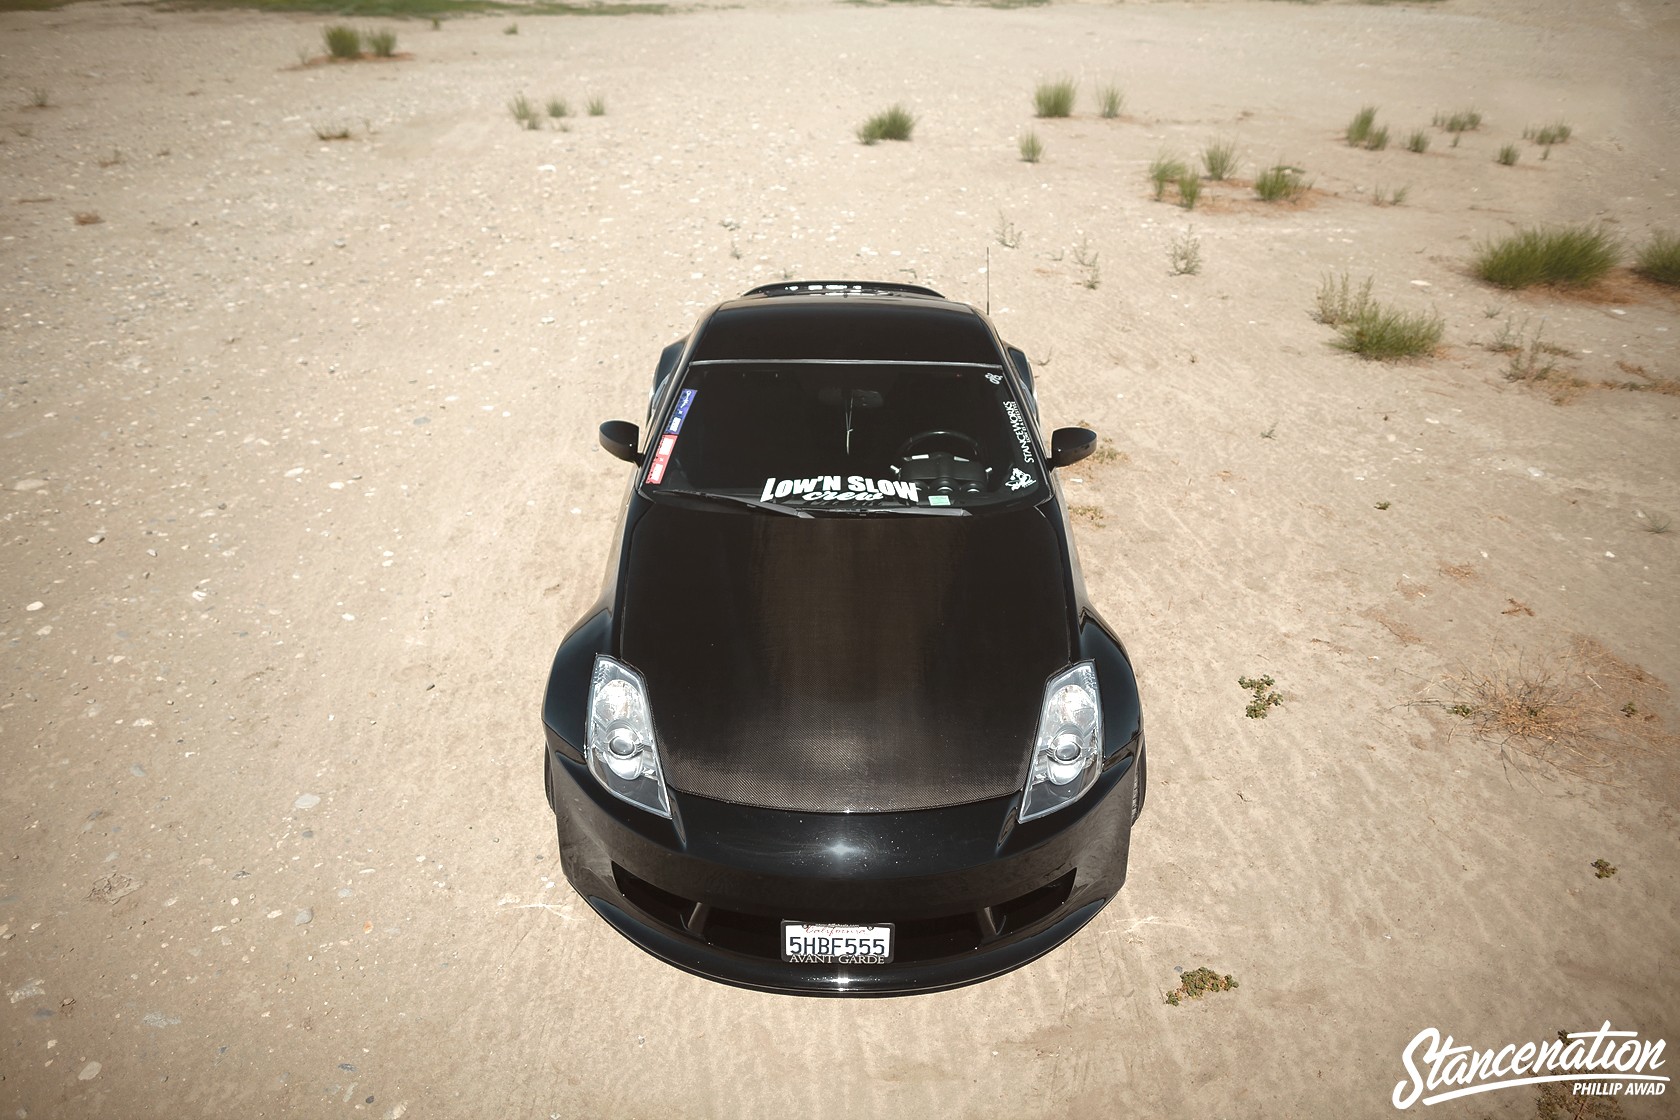 General 1680x1120 Nissan Nissan 350Z car vehicle sports car black cars sand dunes Japanese cars high angle frontal view Nissan Fairlady Z stance (cars) StanceNation